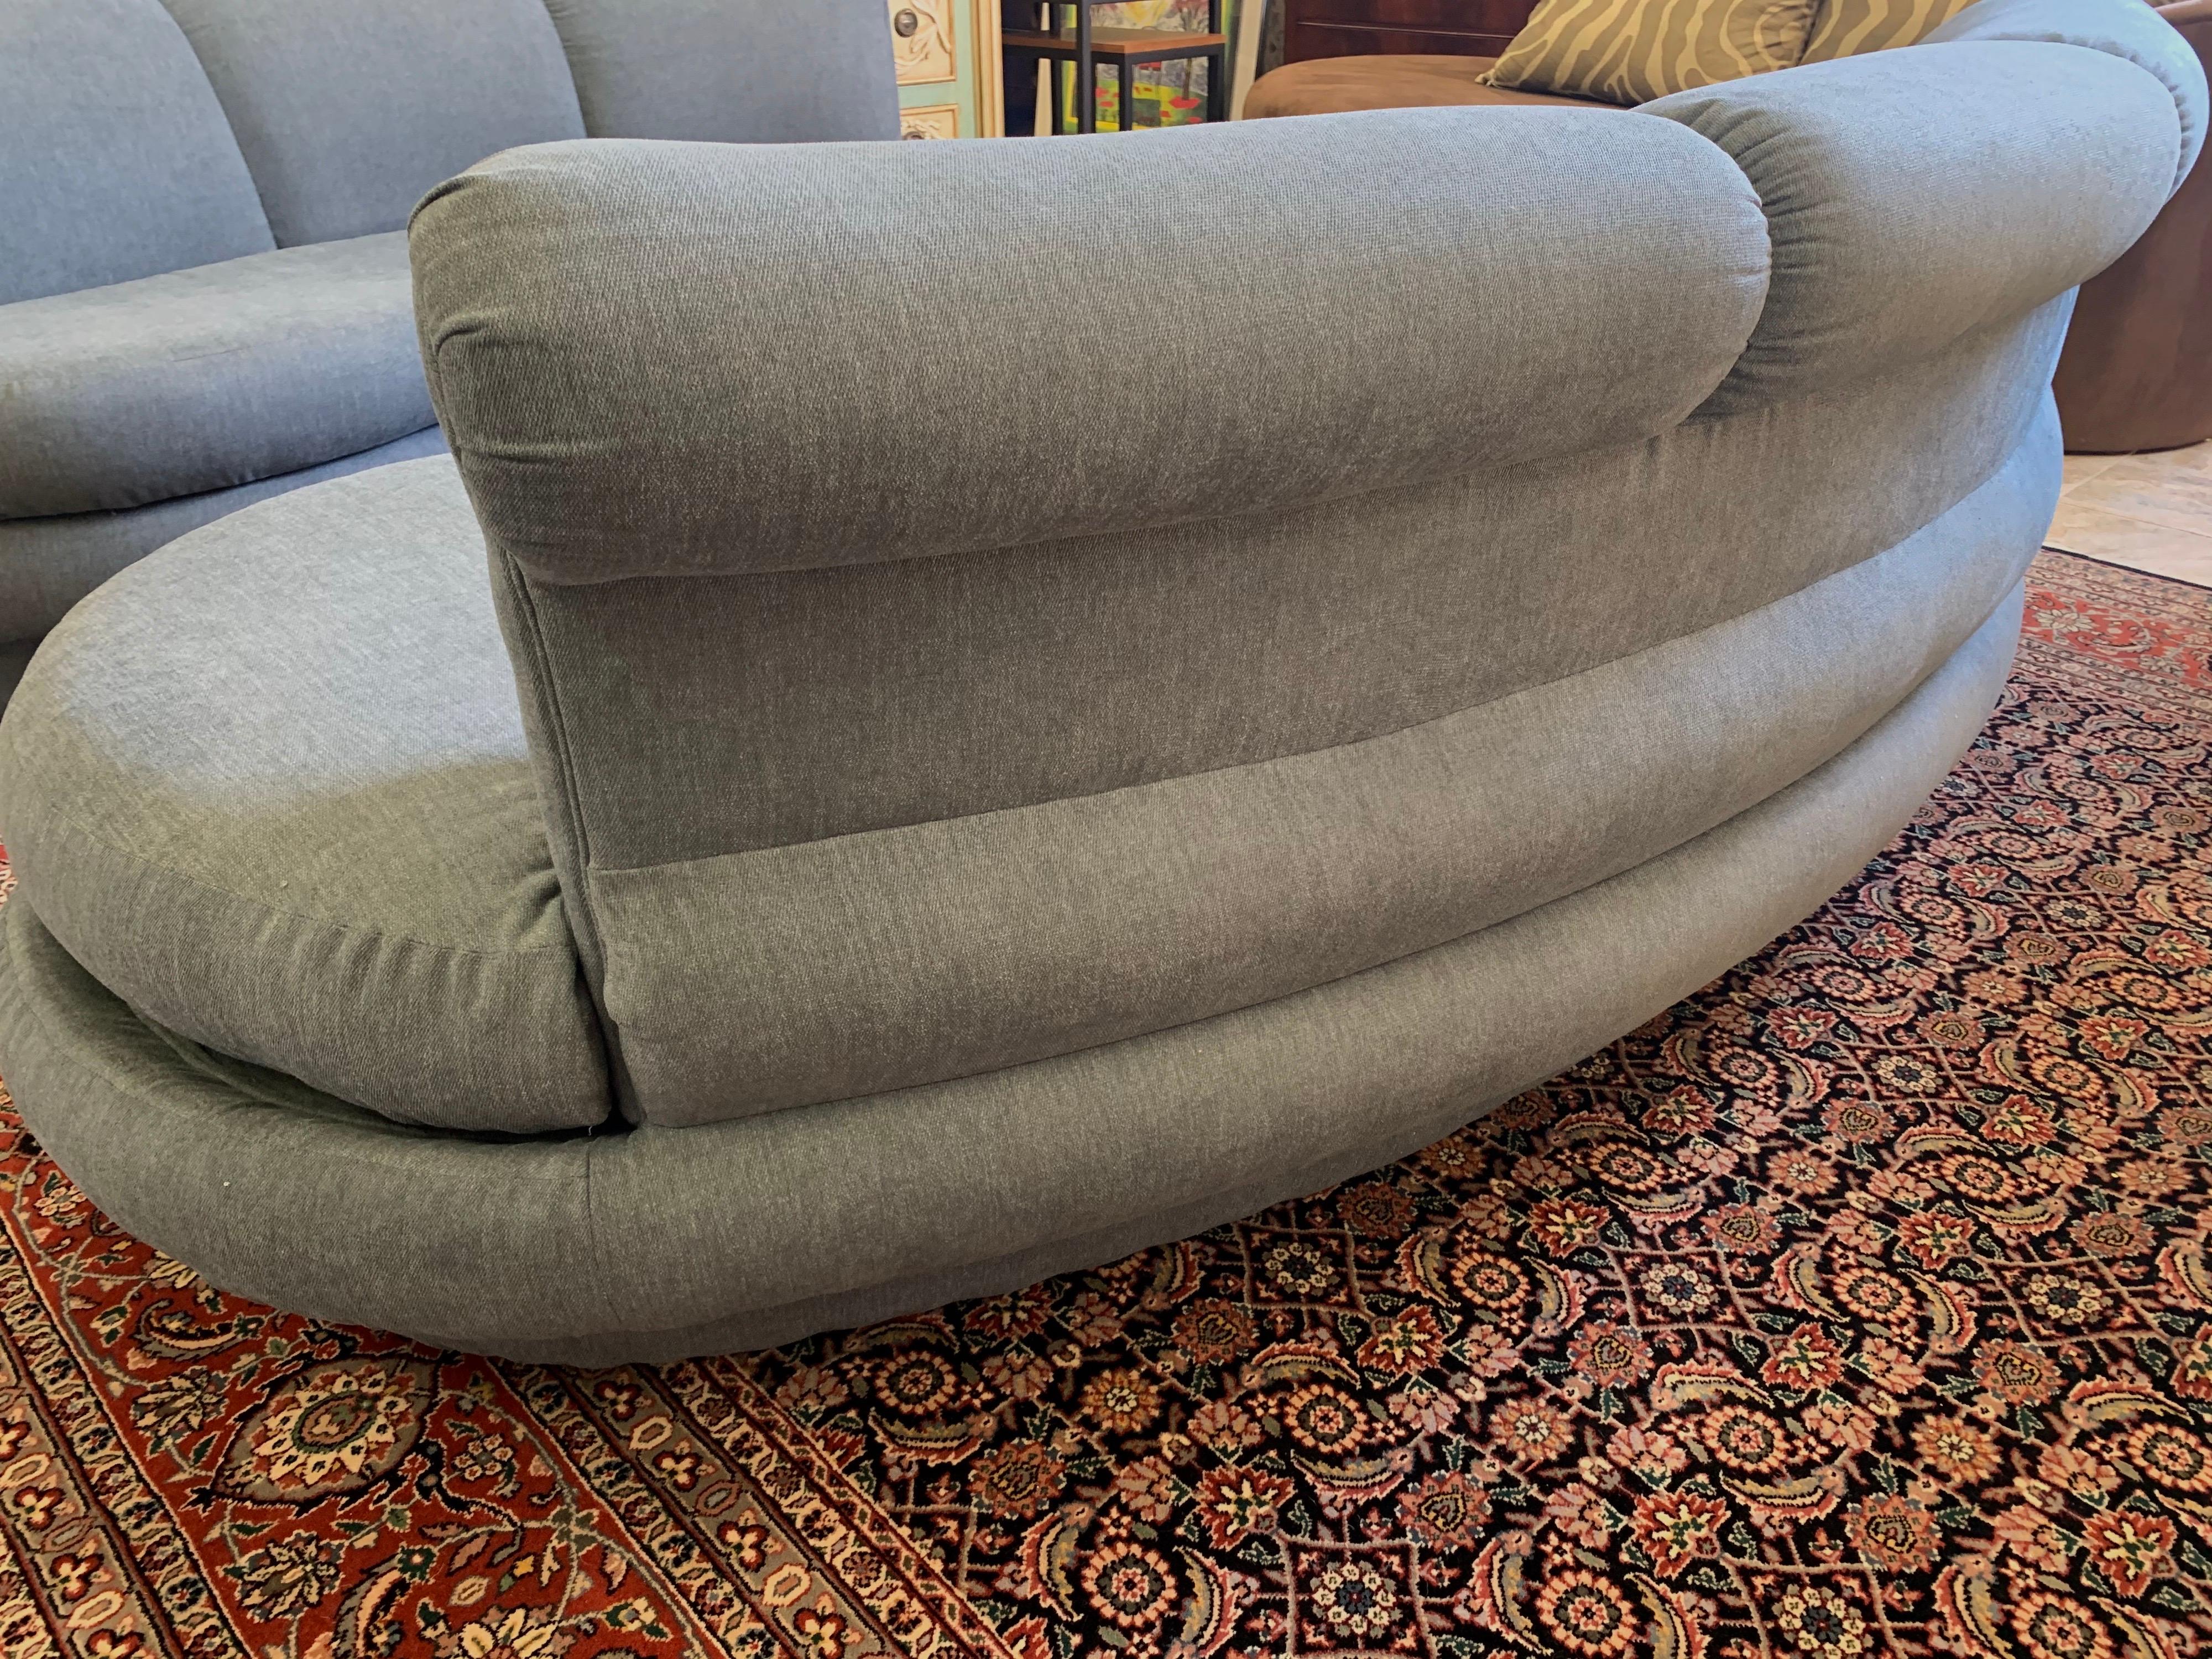 Matching Pearsall Comfort Design Cloud Sofas New Upholstered in Slate Gray, Pair 6